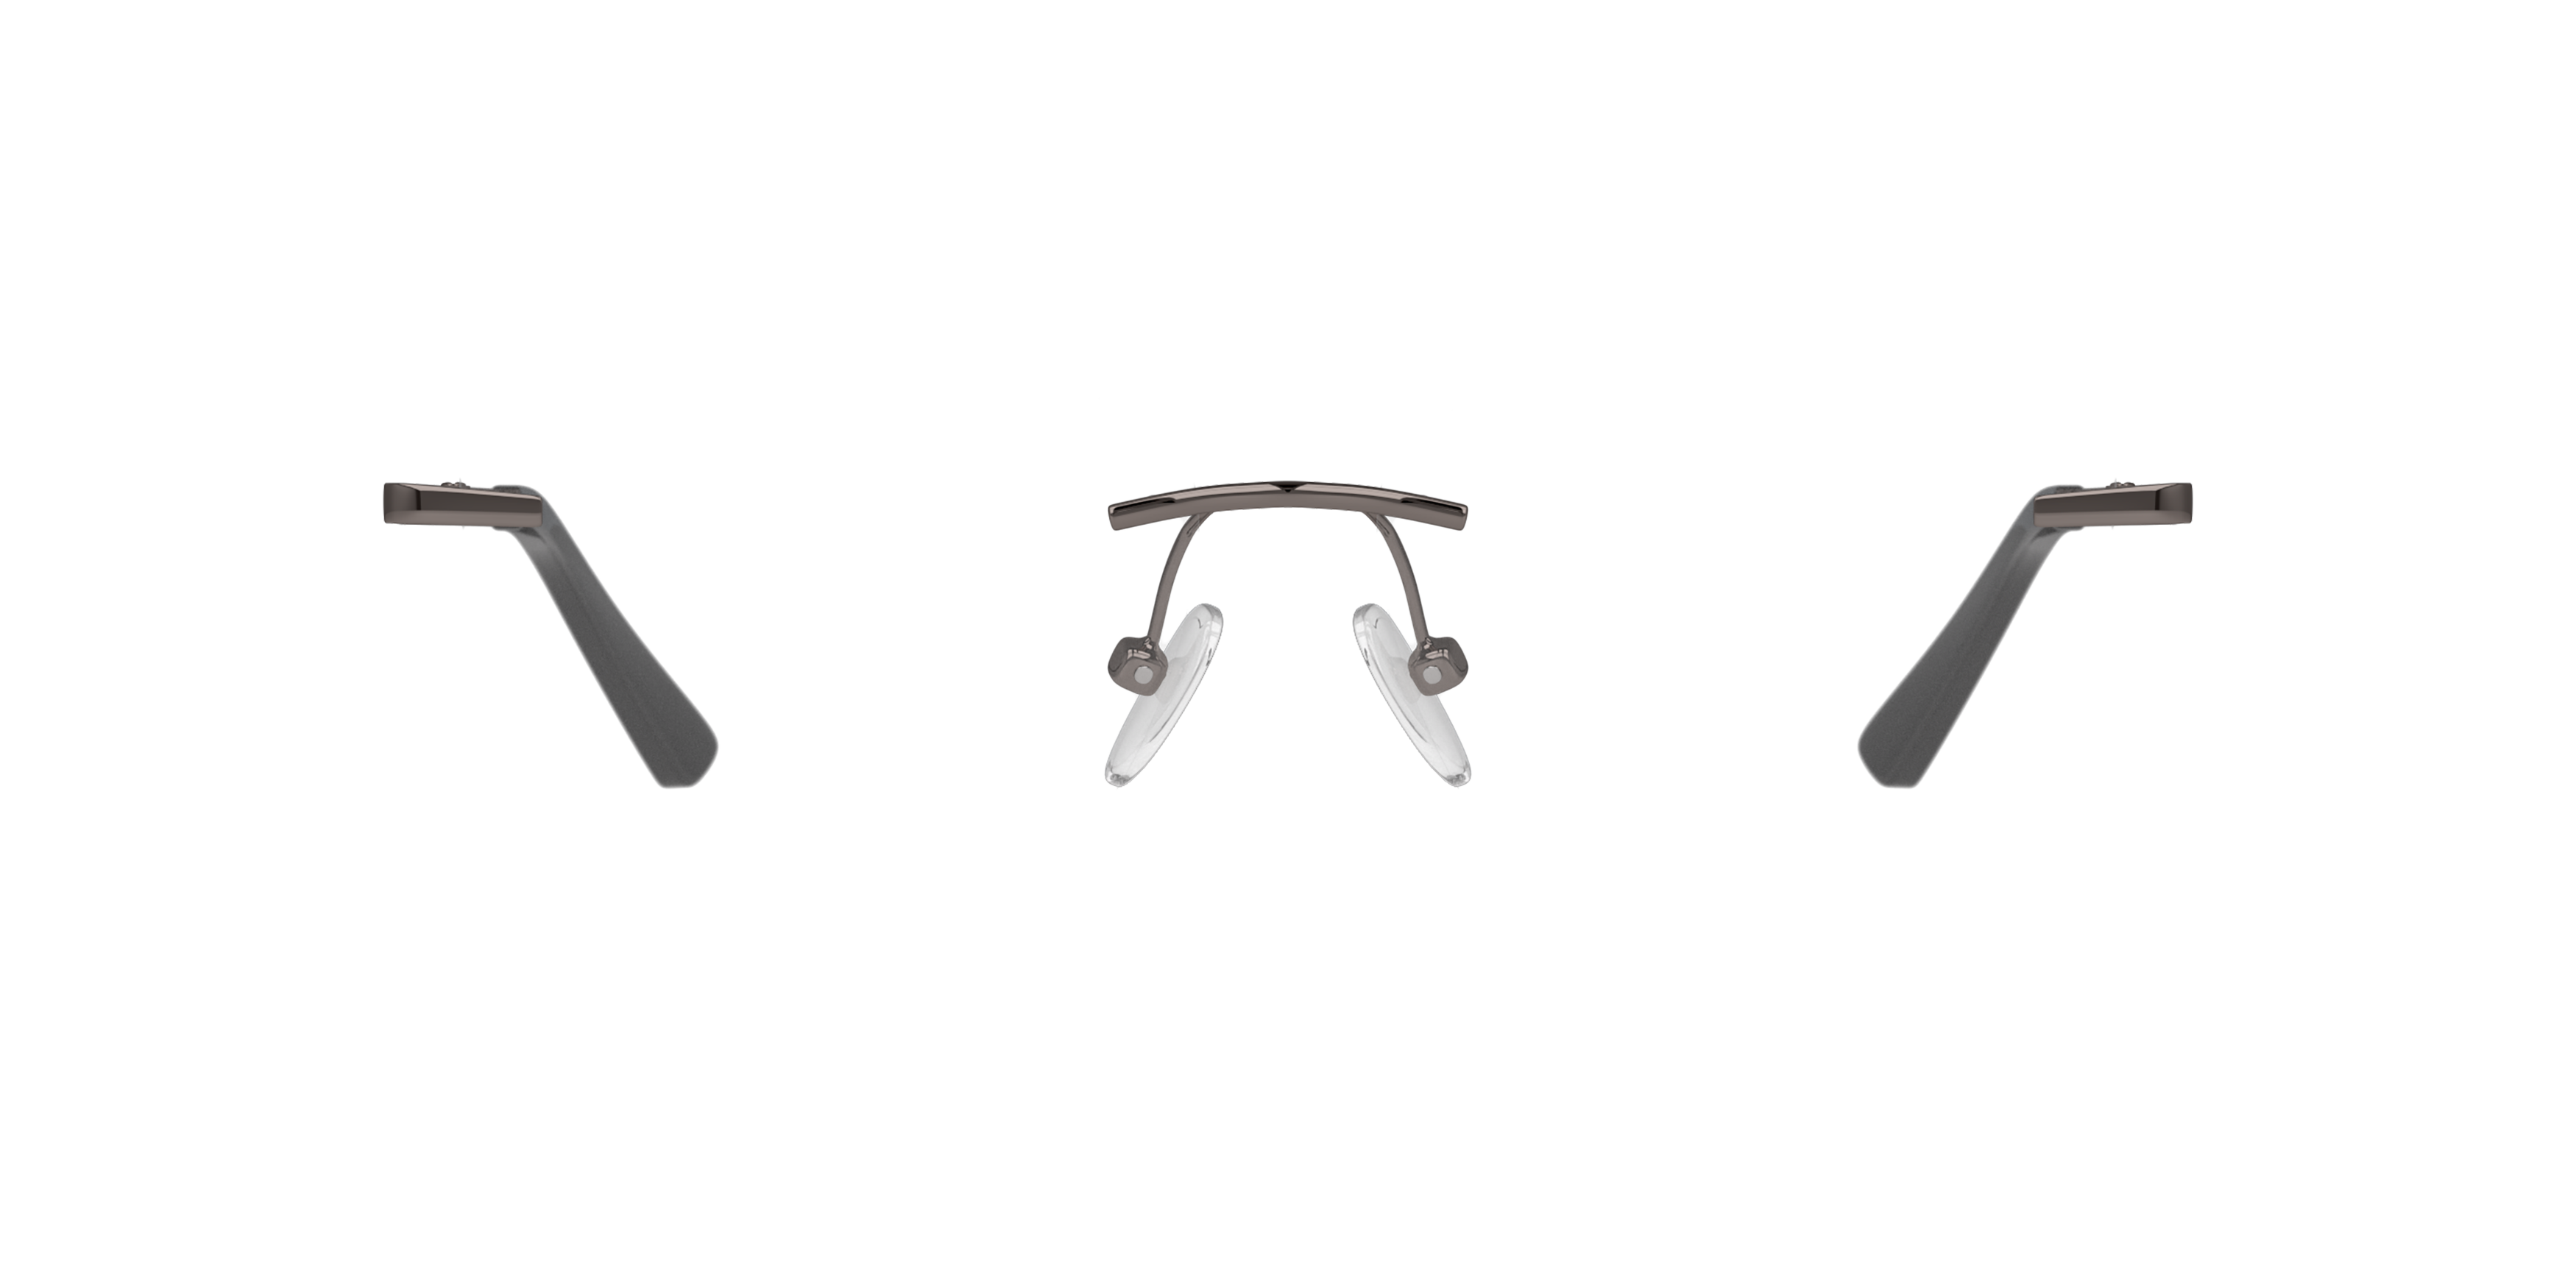 Front Unofficial UNOF0468 (GG00) Glasses Transparent / Grey